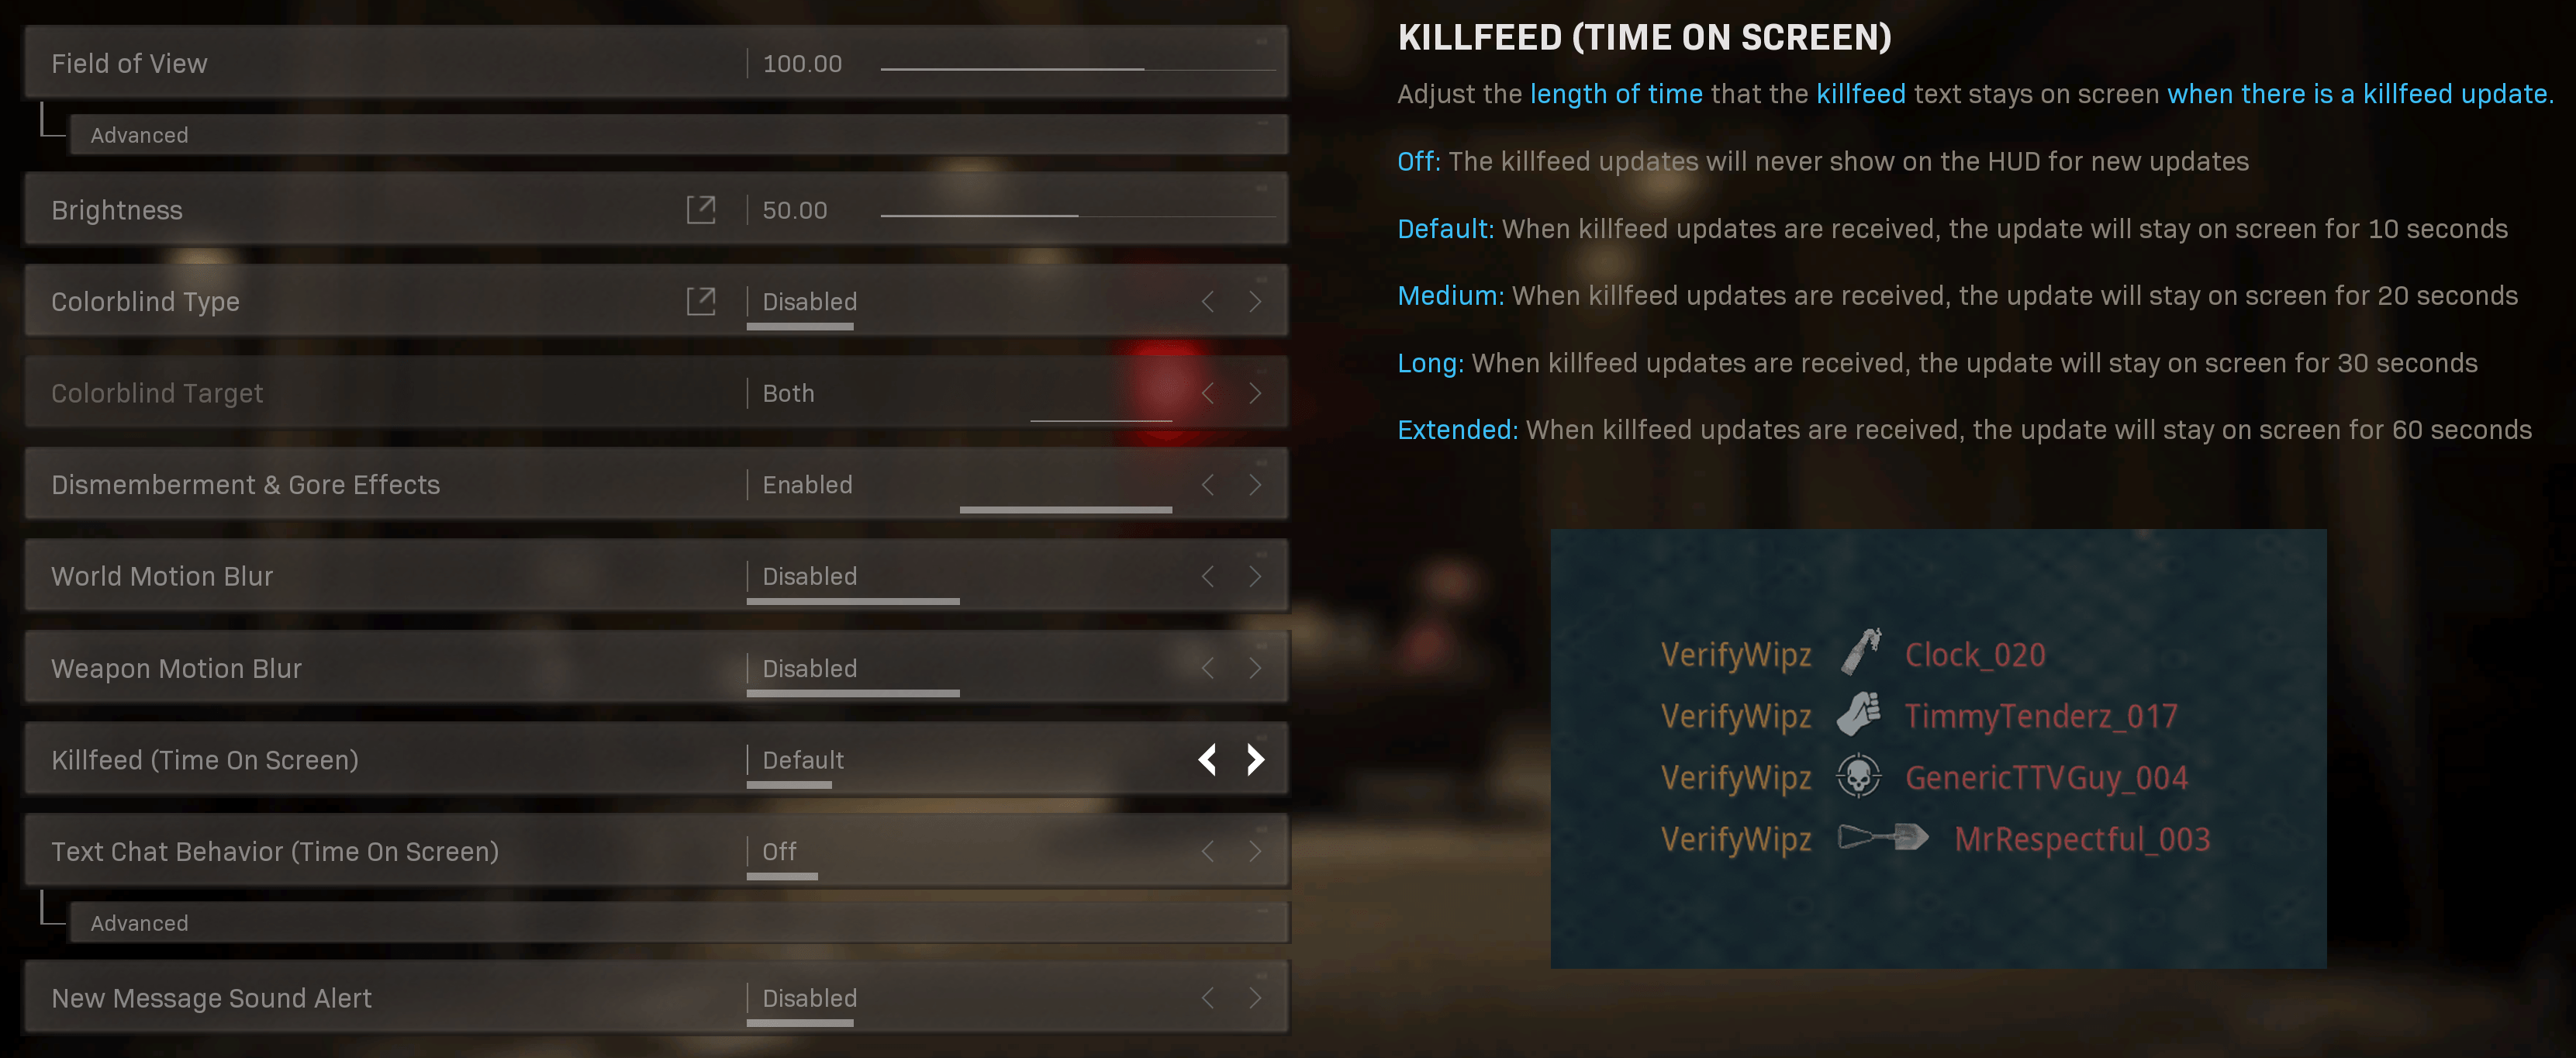 Screenshot of the new Killfeed Time on Screen option